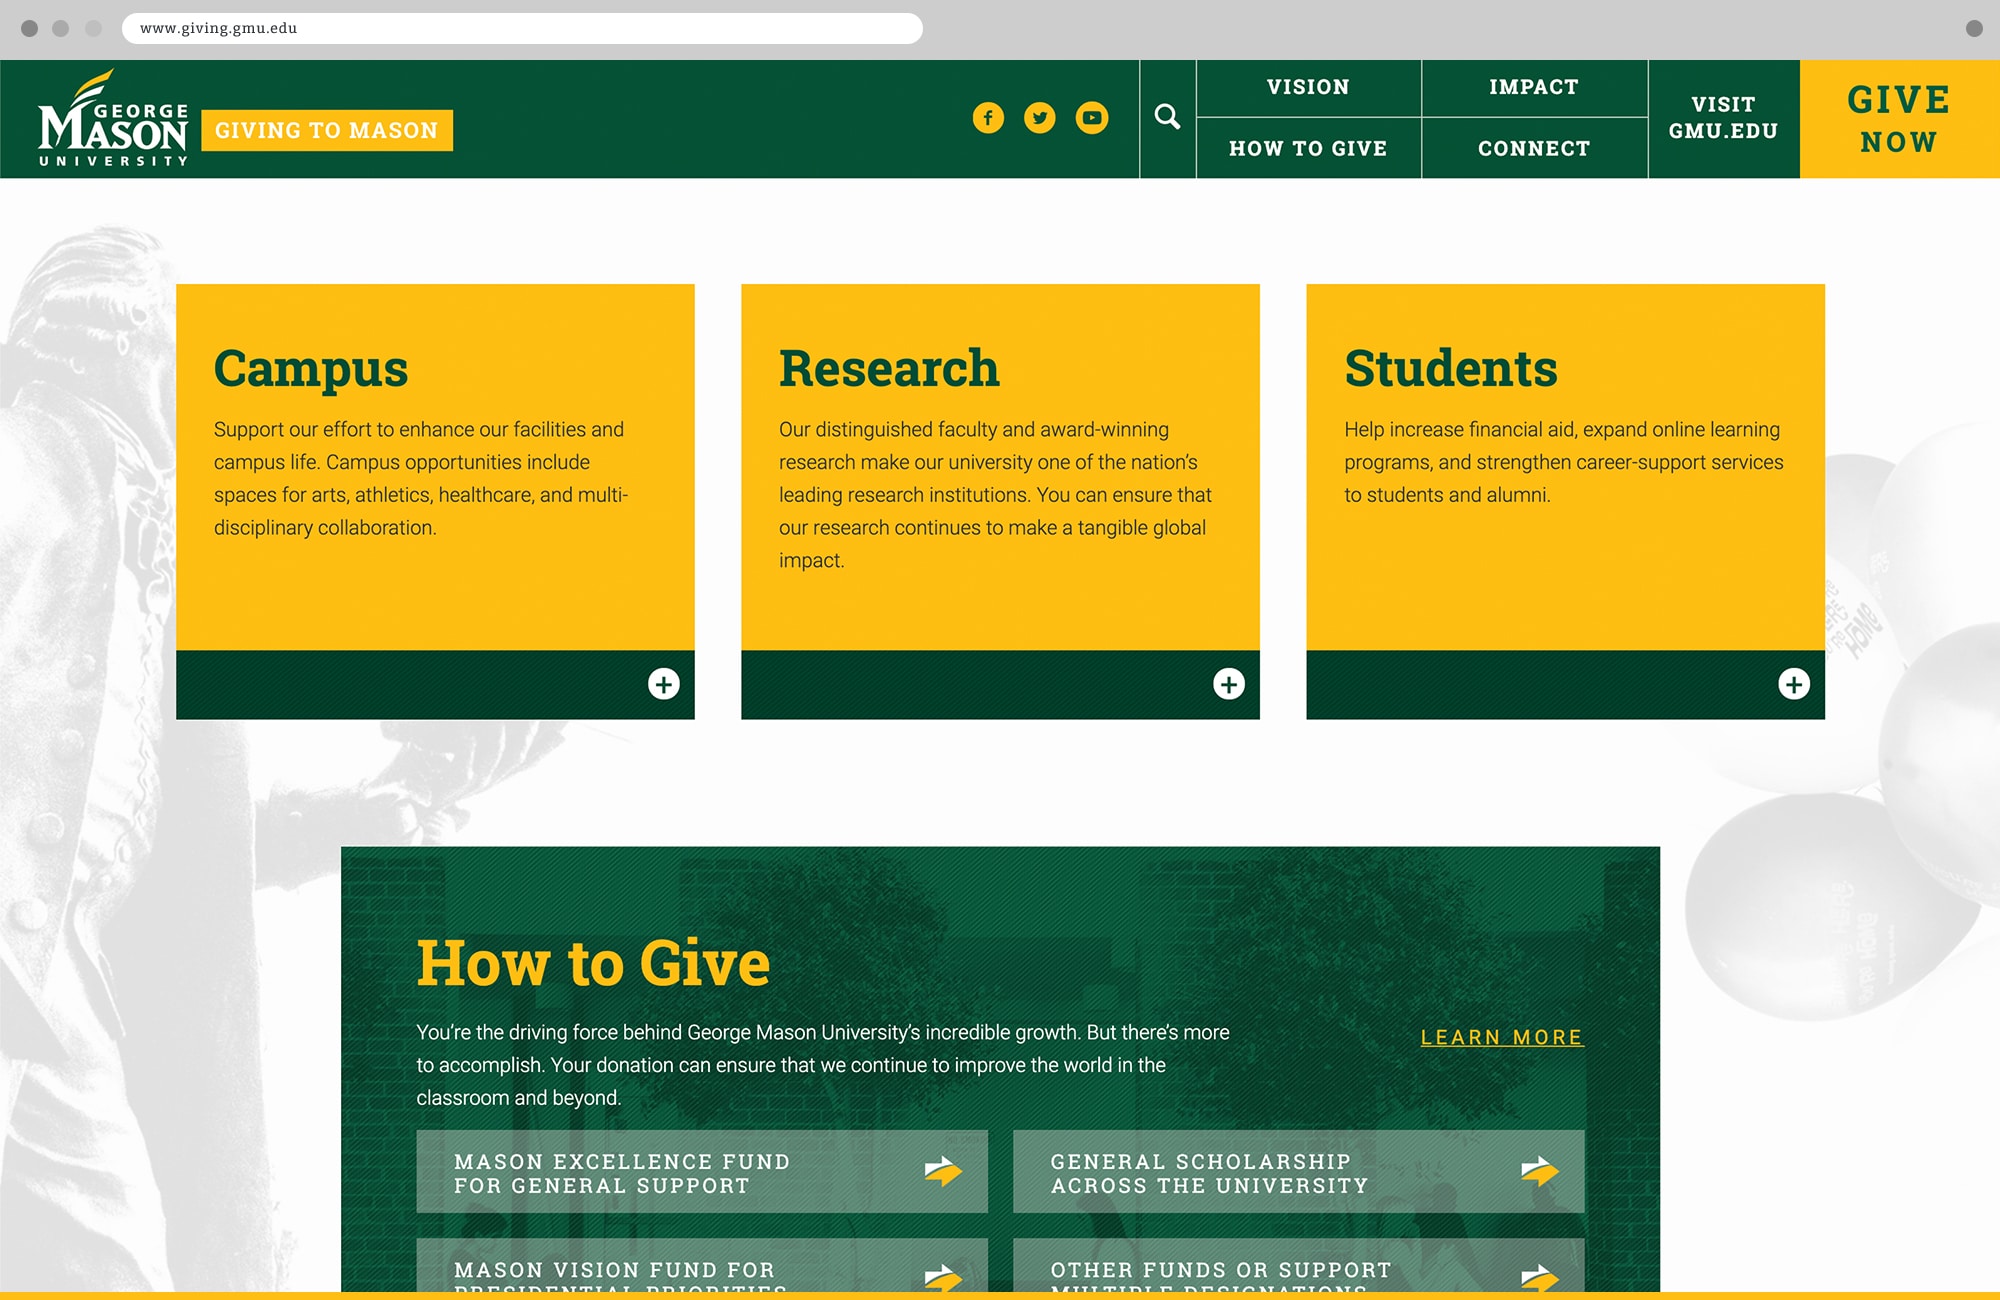 Punch - George Mason University How to Give Options on Website